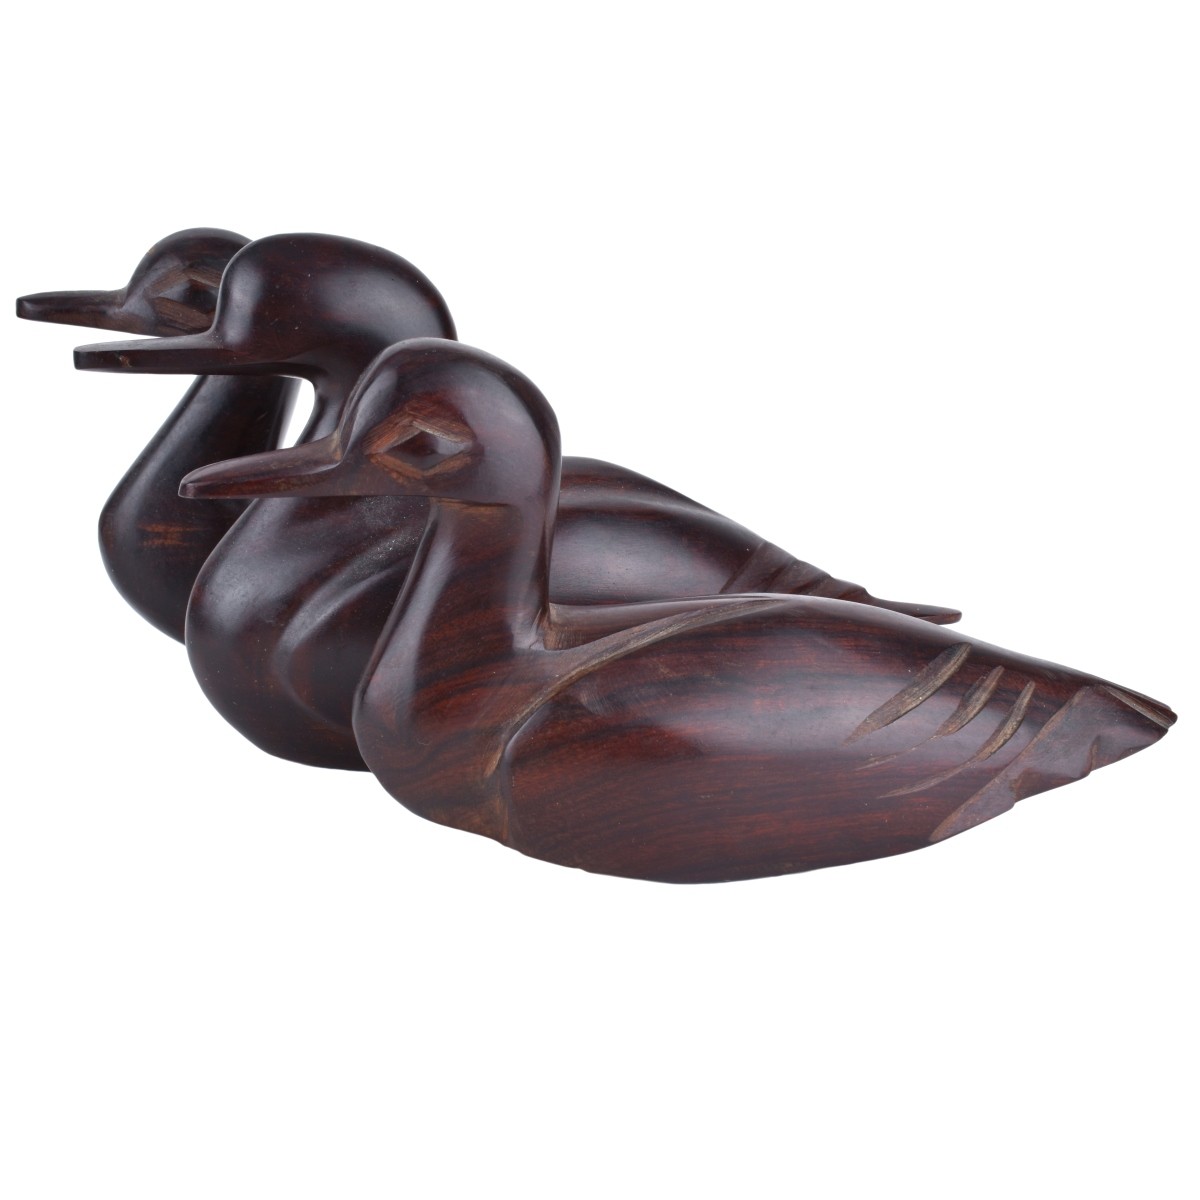 Grouping of Five (5) Carved Duck Decoys